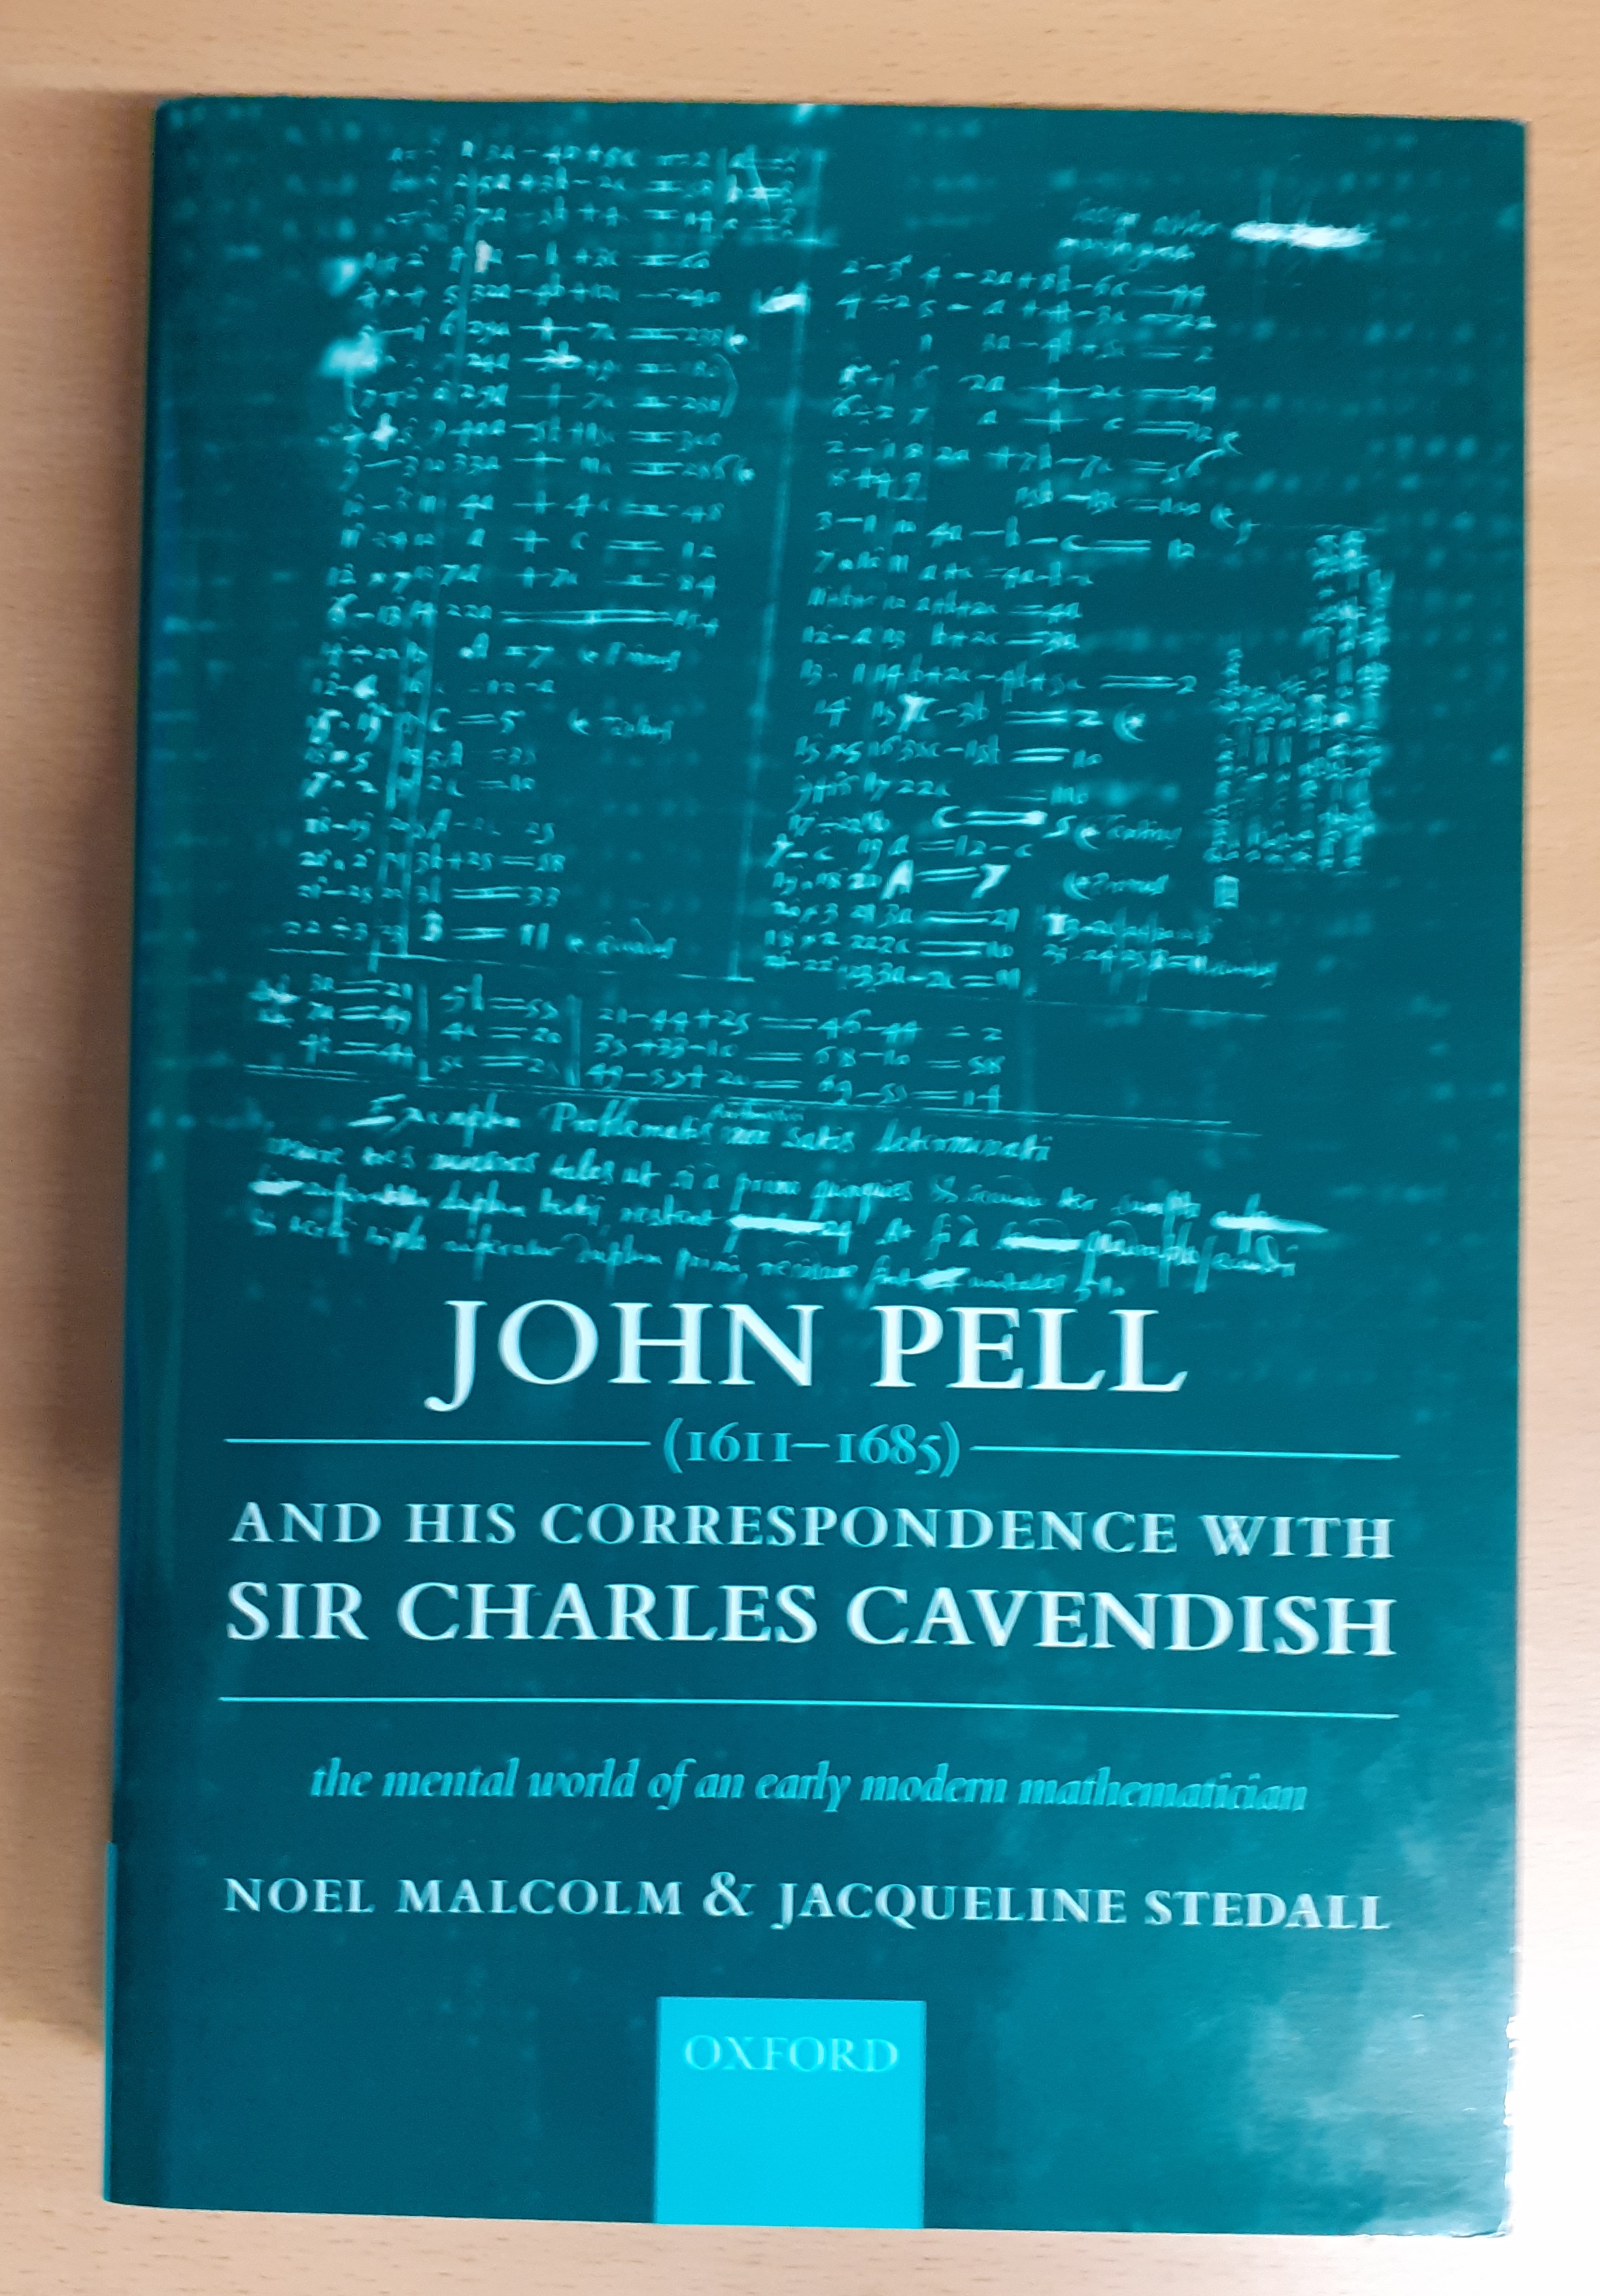 John Pell (1611-1685) and his correspondence with Sir Charles Cavendish The mental world of an early modern mathematician. - Malcolm, Noel and Jacqueline Stedall